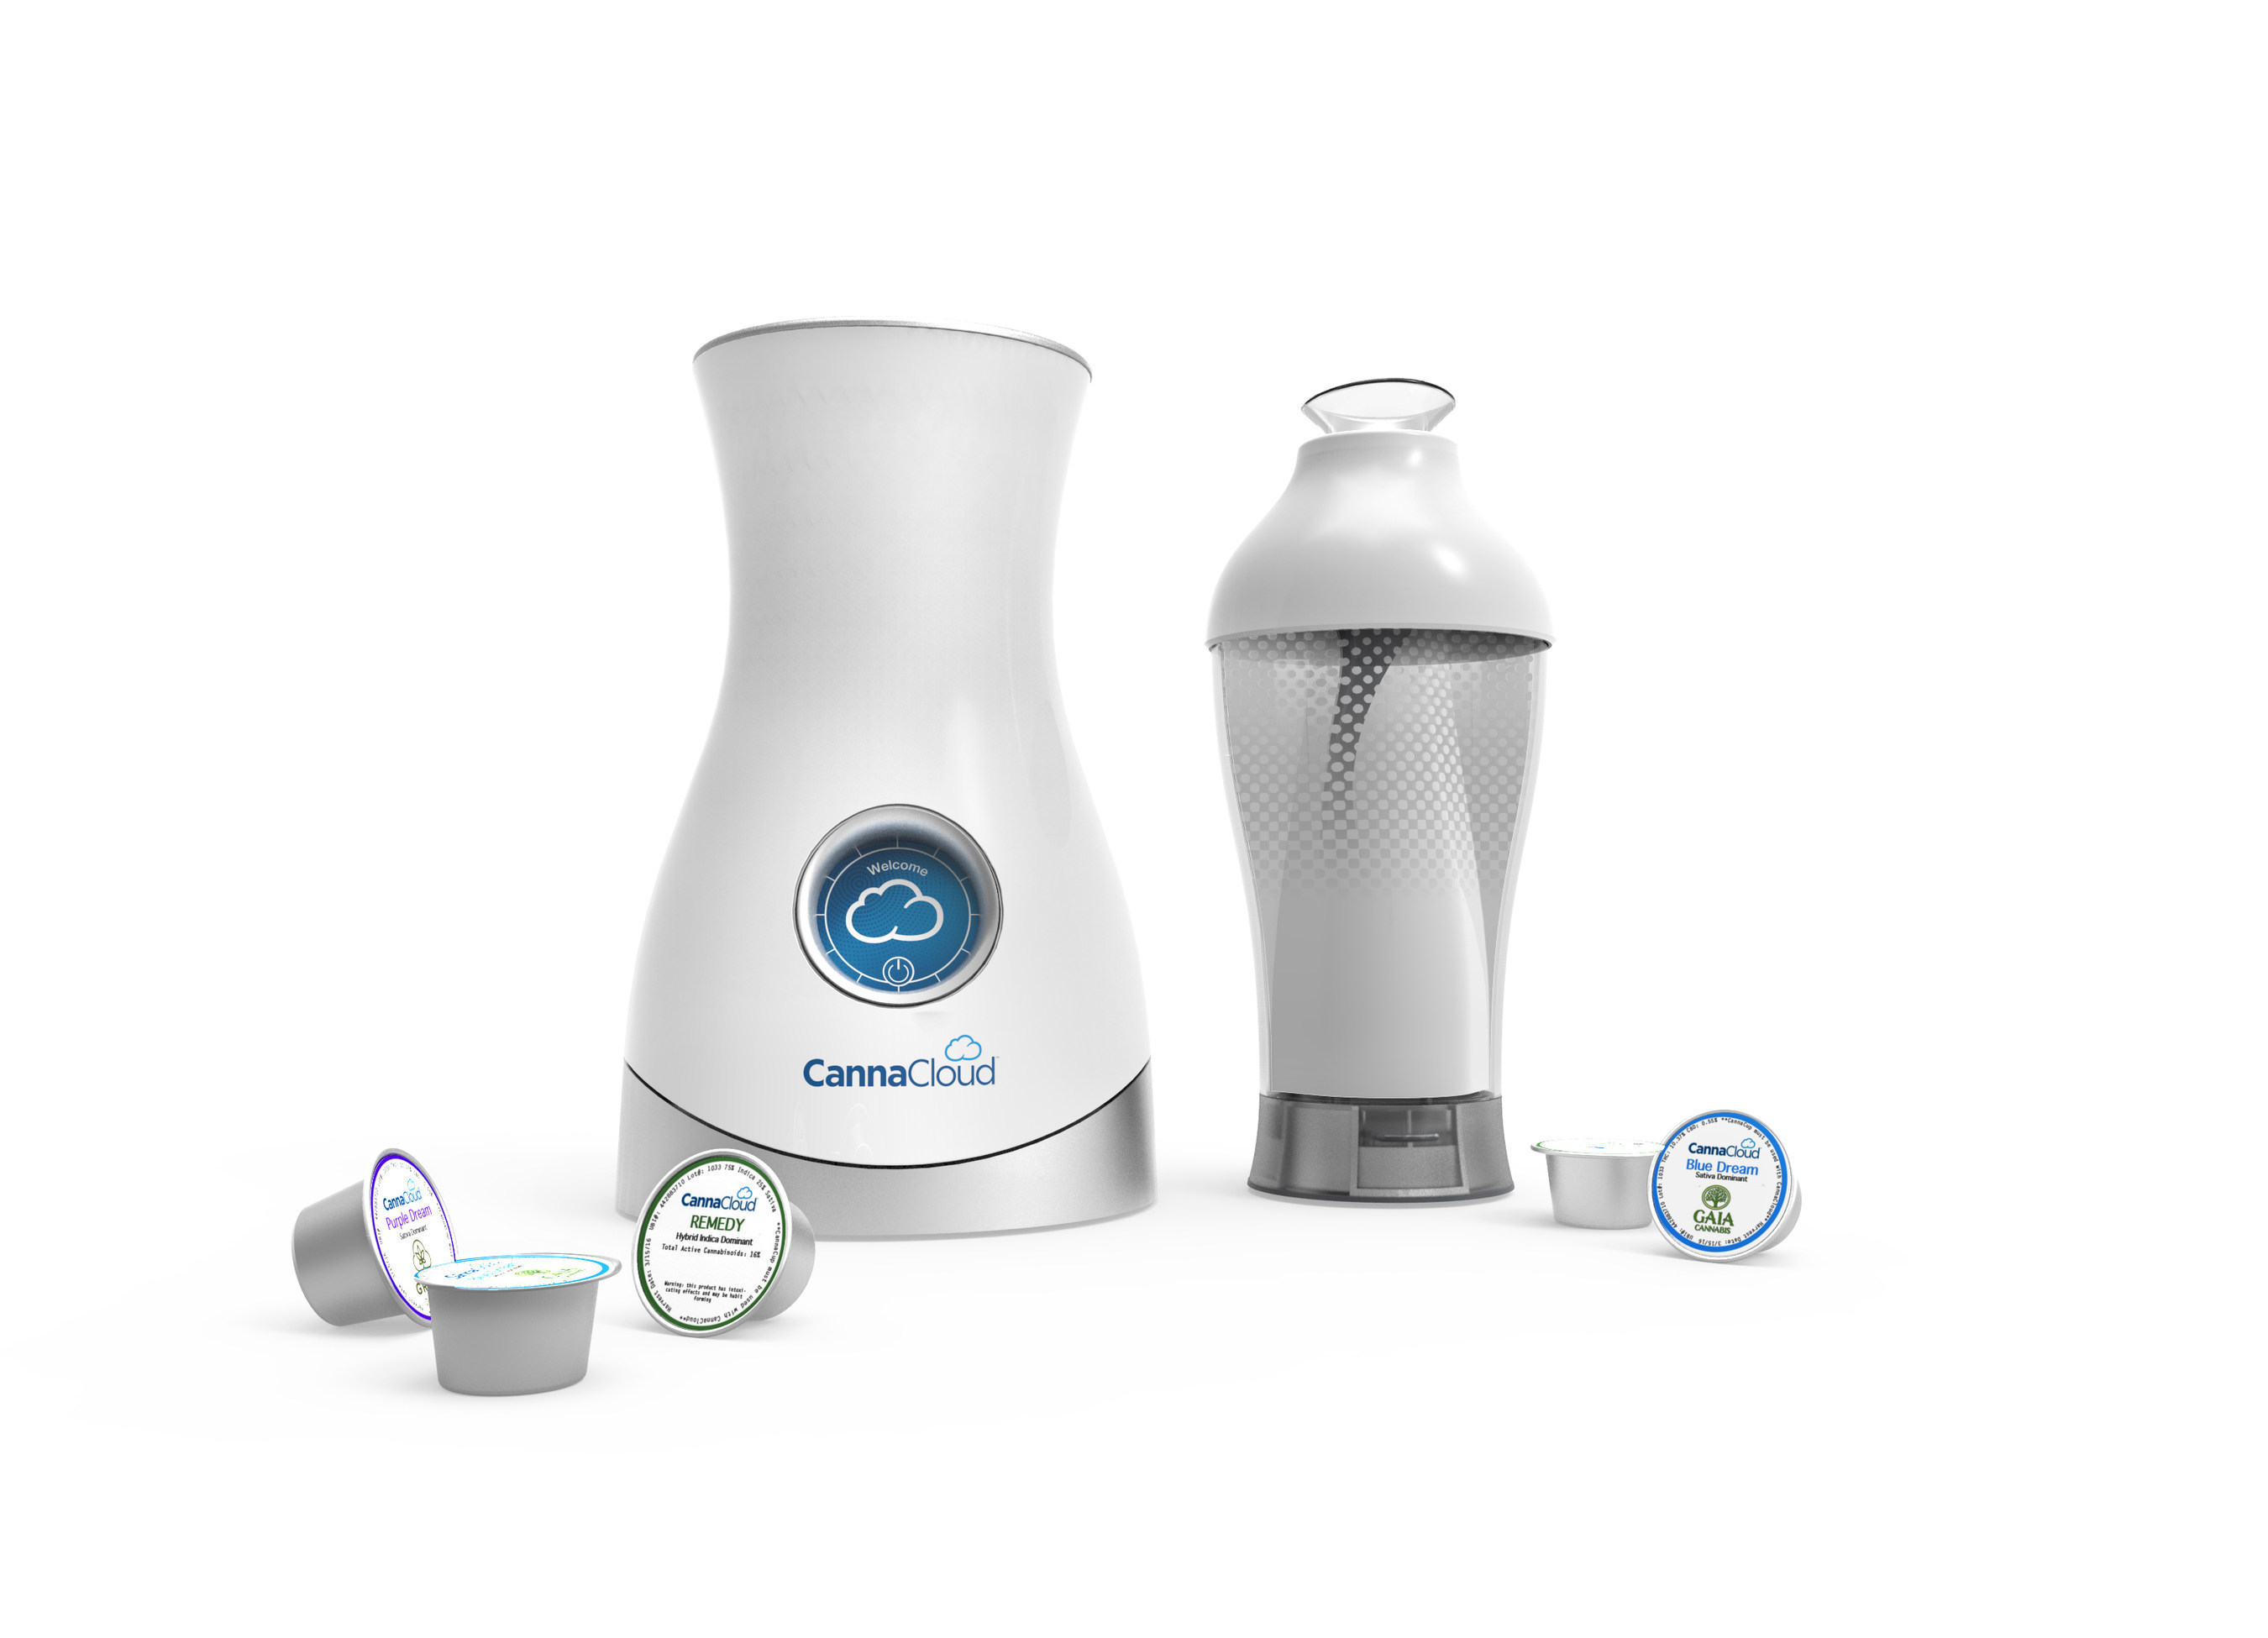 The complete system includes the ground-breaking vaporizer device, CannaCloud(TM); single-use, pre-measured pods containing ground, lab tested cannabis called CannaCloud Pods(TM); and an automated processing and filling machine, the CannaMatic(TM)